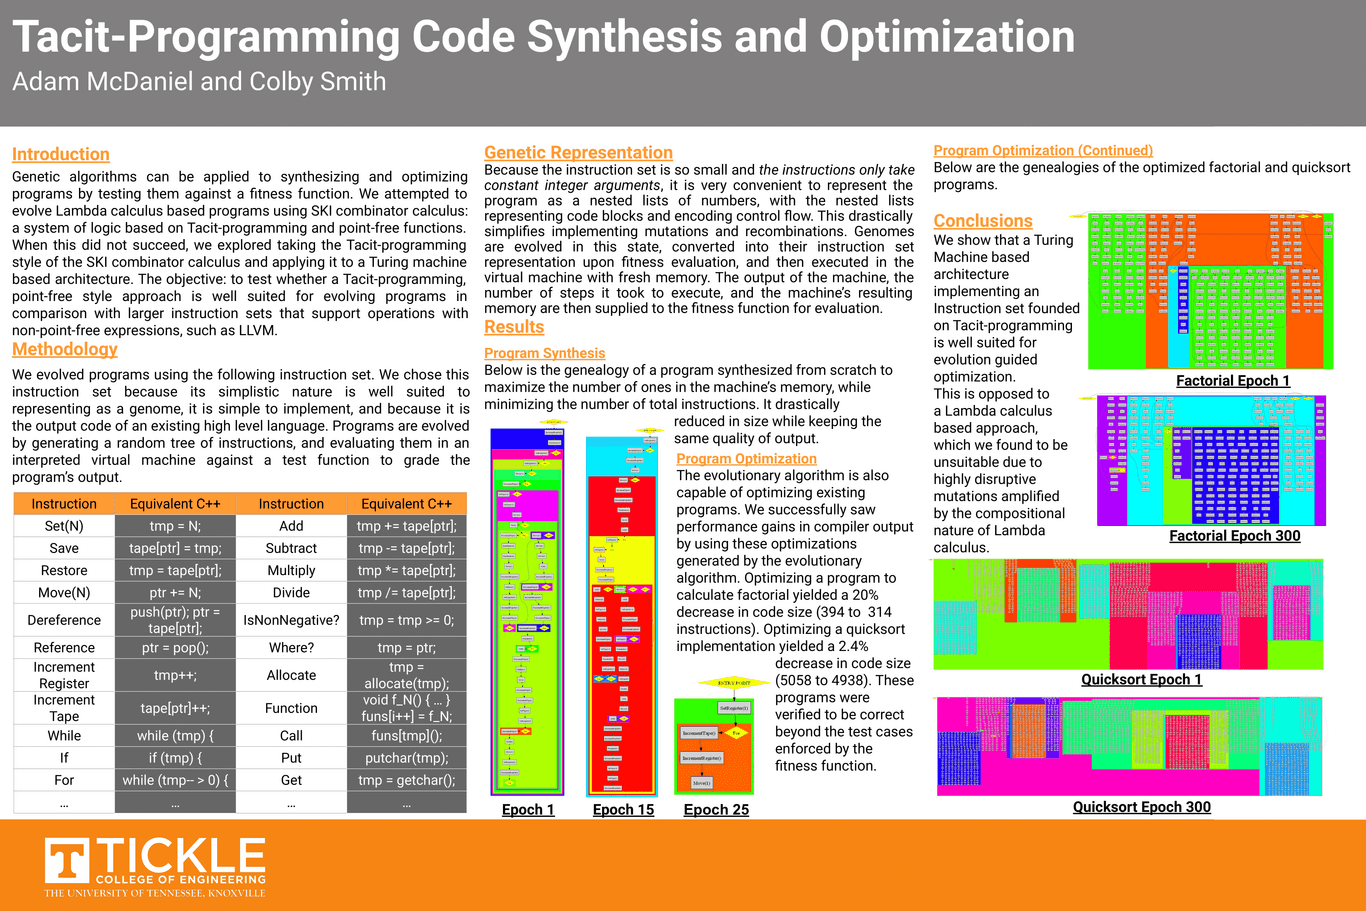 Code Synthesis and Optimization with Genetic Algorithms🧬